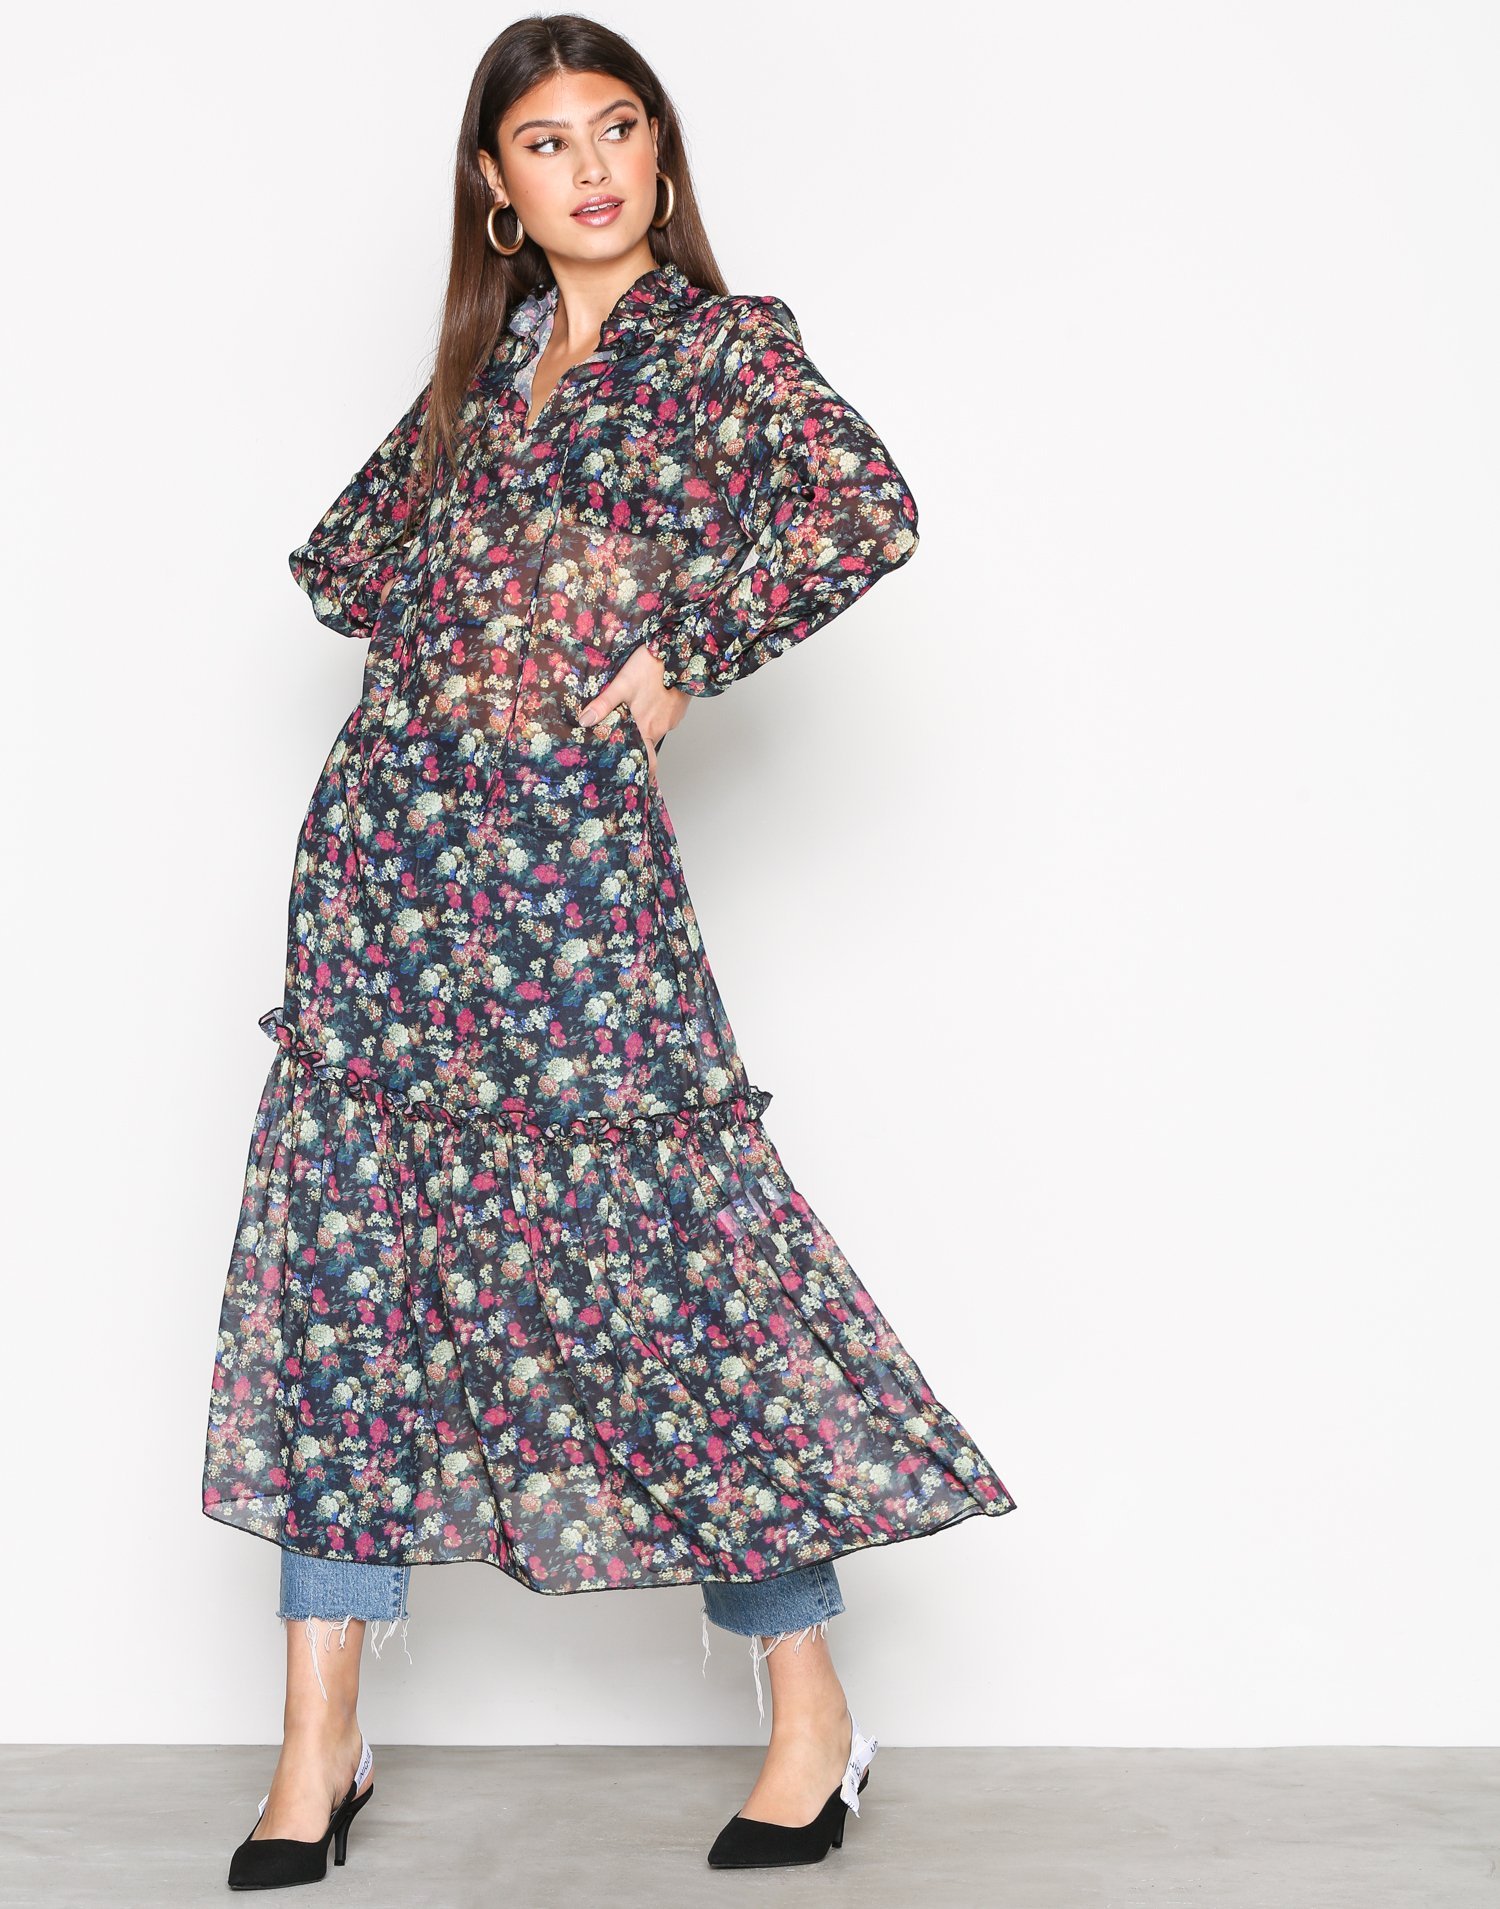 Flowy Flower Dress - Nly Trend - Patterned - Dresses - Clothing - Women ...